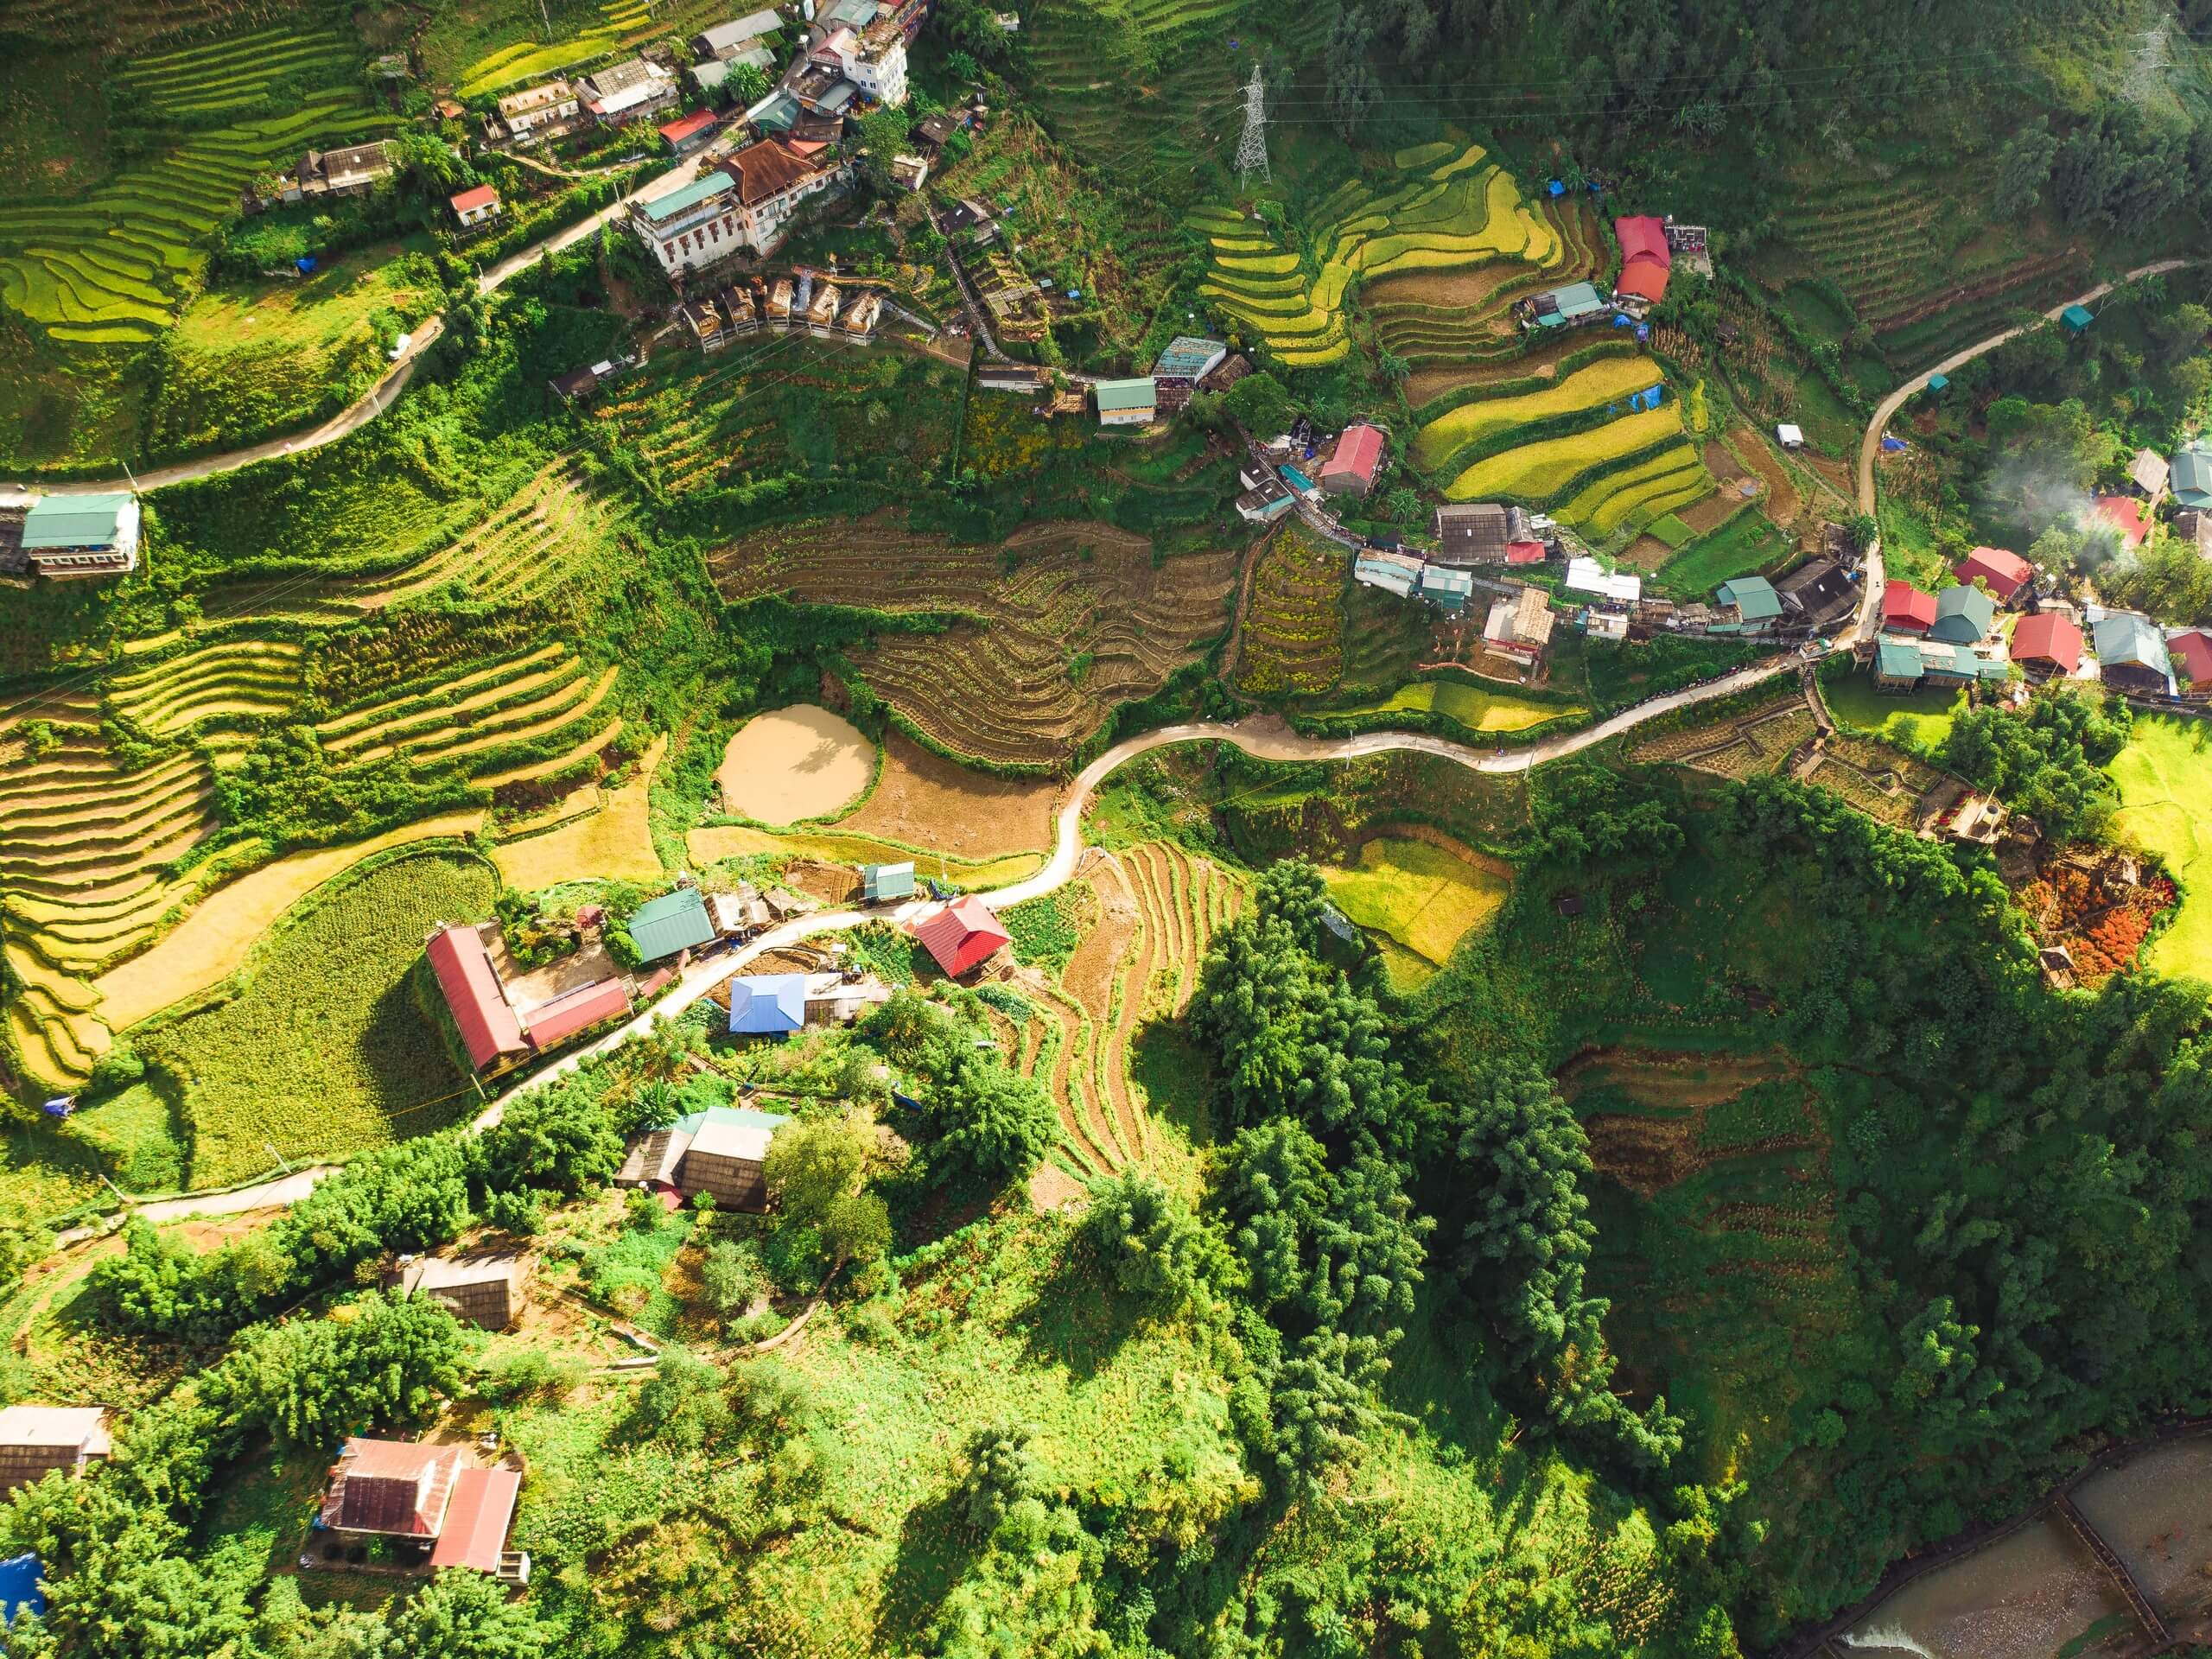 Sapa Valley and it's rice terraces